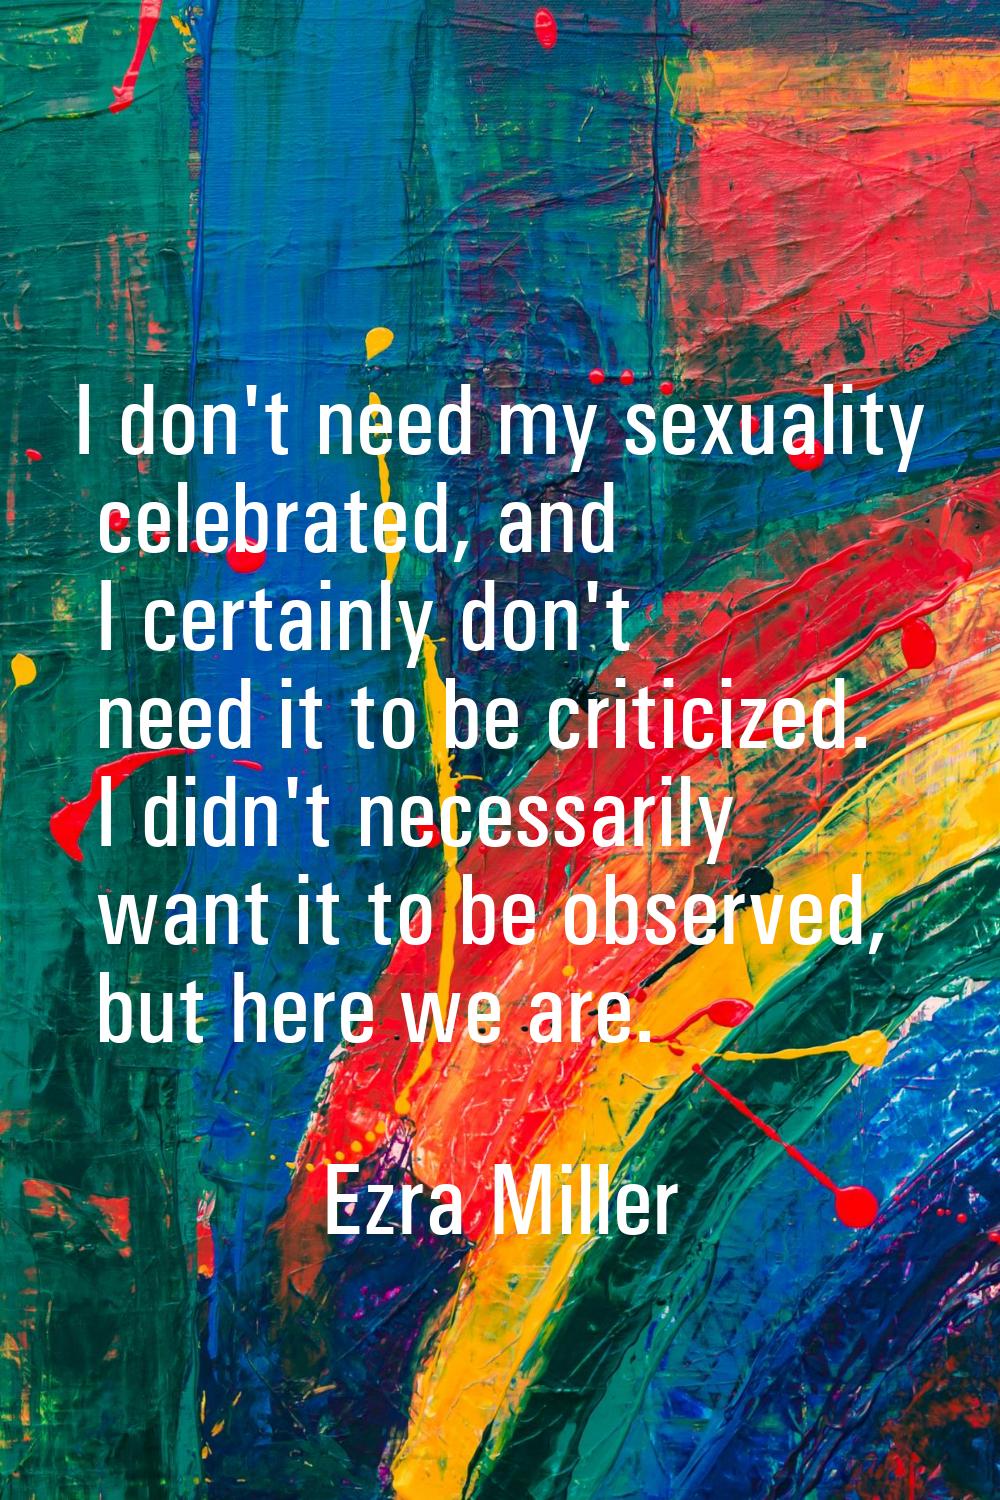 I don't need my sexuality celebrated, and I certainly don't need it to be criticized. I didn't nece